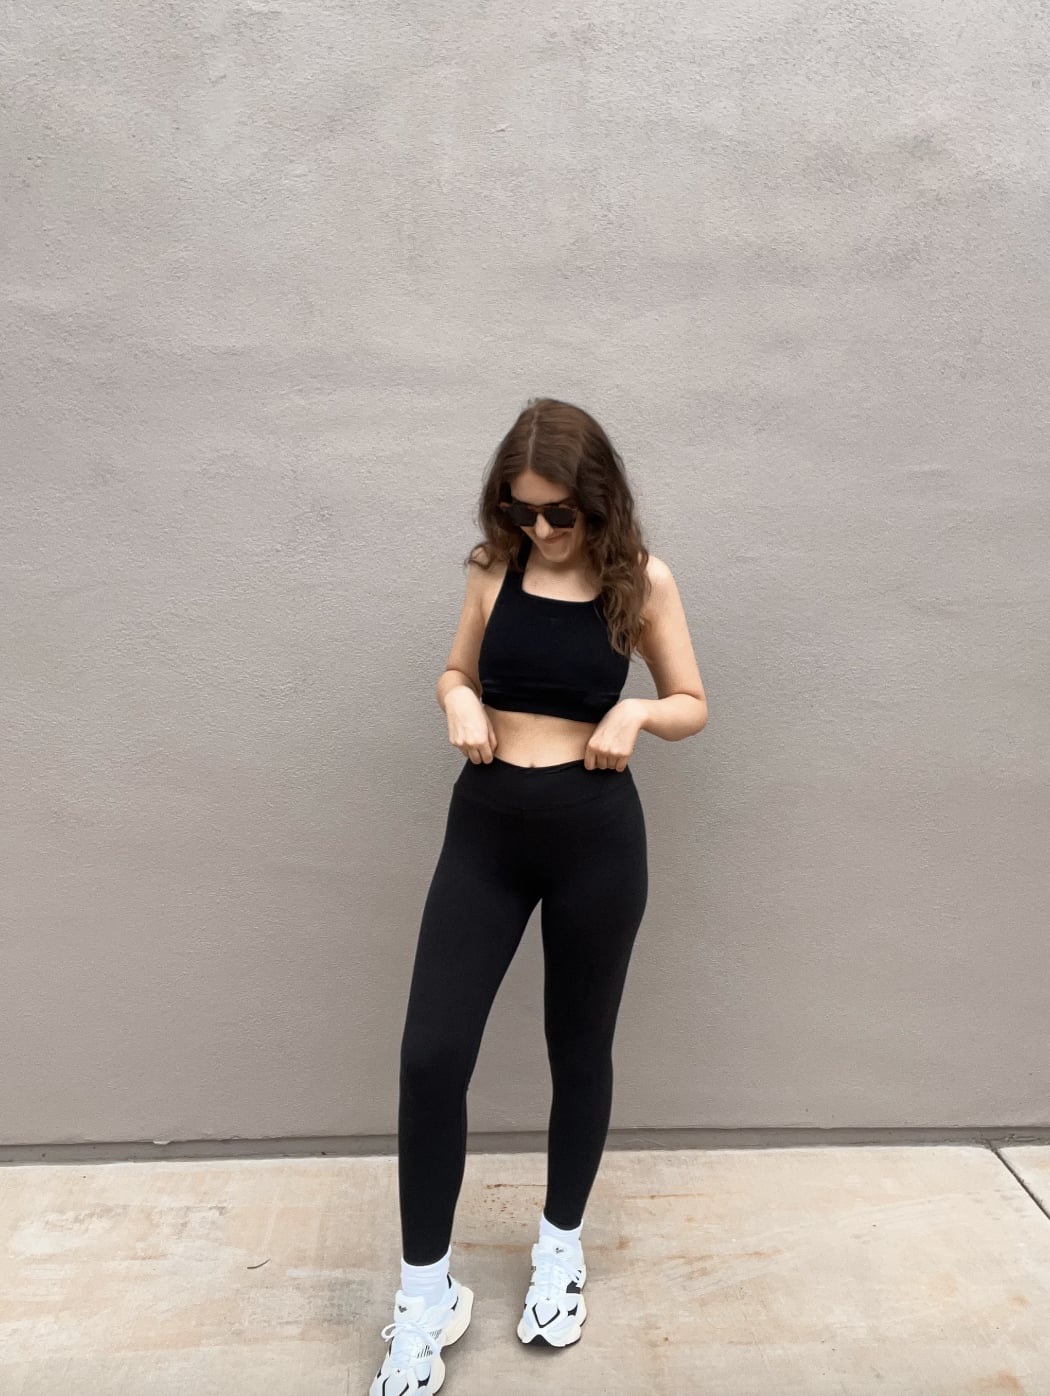 Black Leggings with White T-shirt Outfits (98 ideas & outfits)